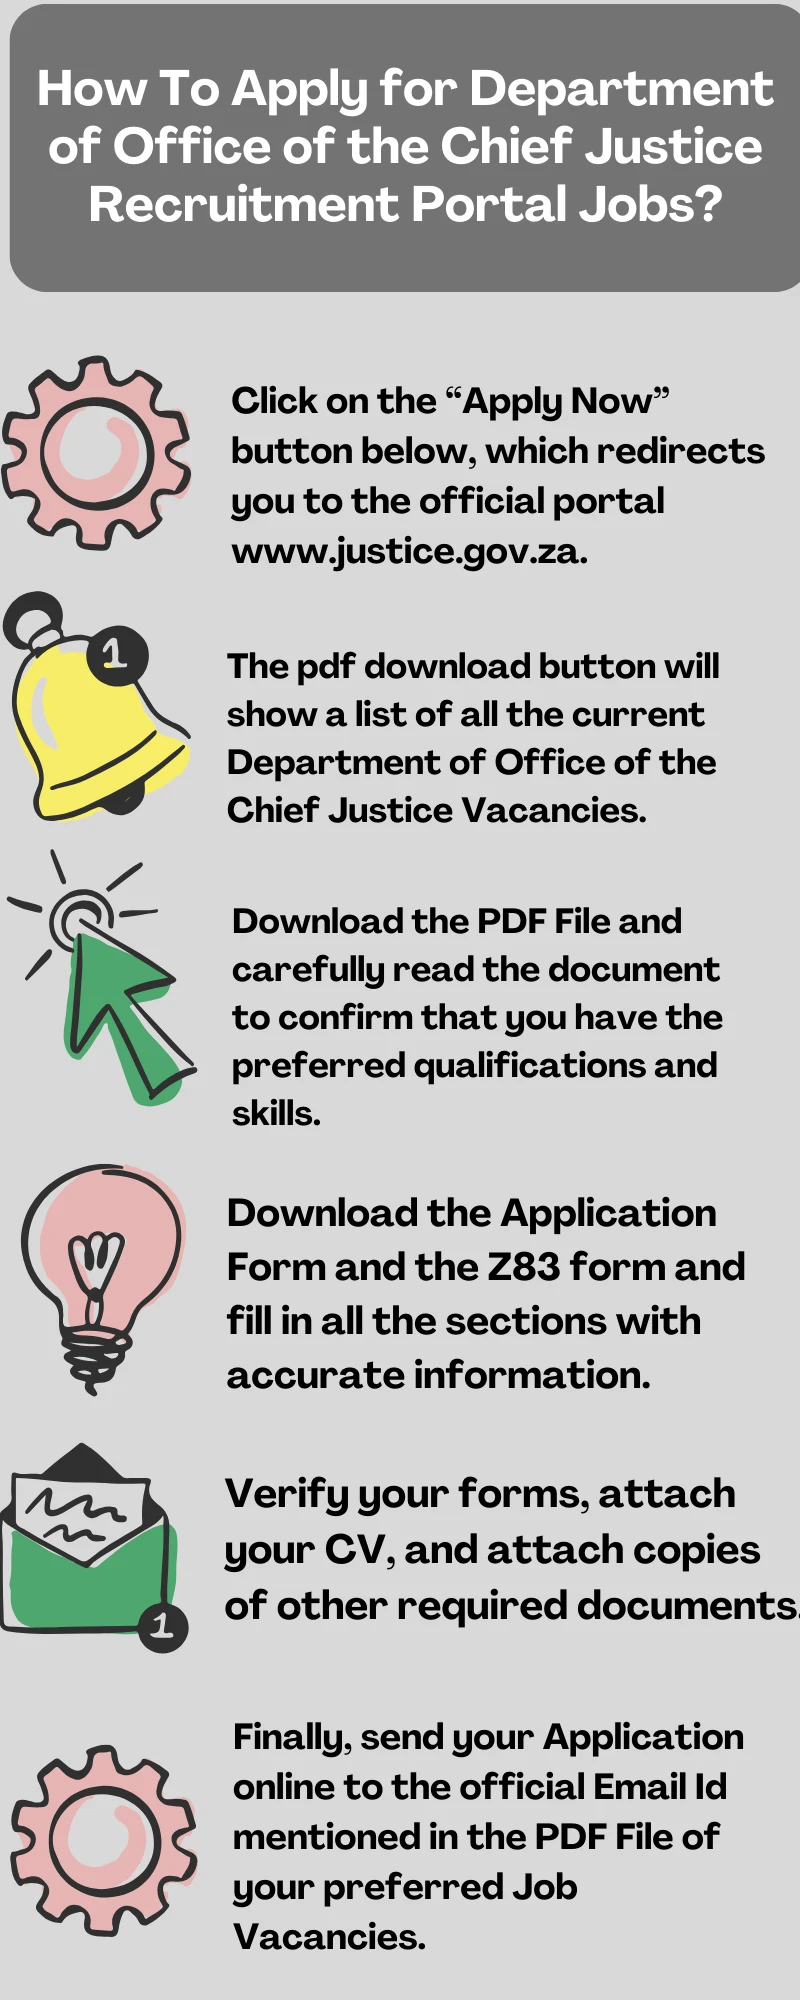 How To Apply for Department of Office of the Chief Justice Recruitment Portal Jobs?